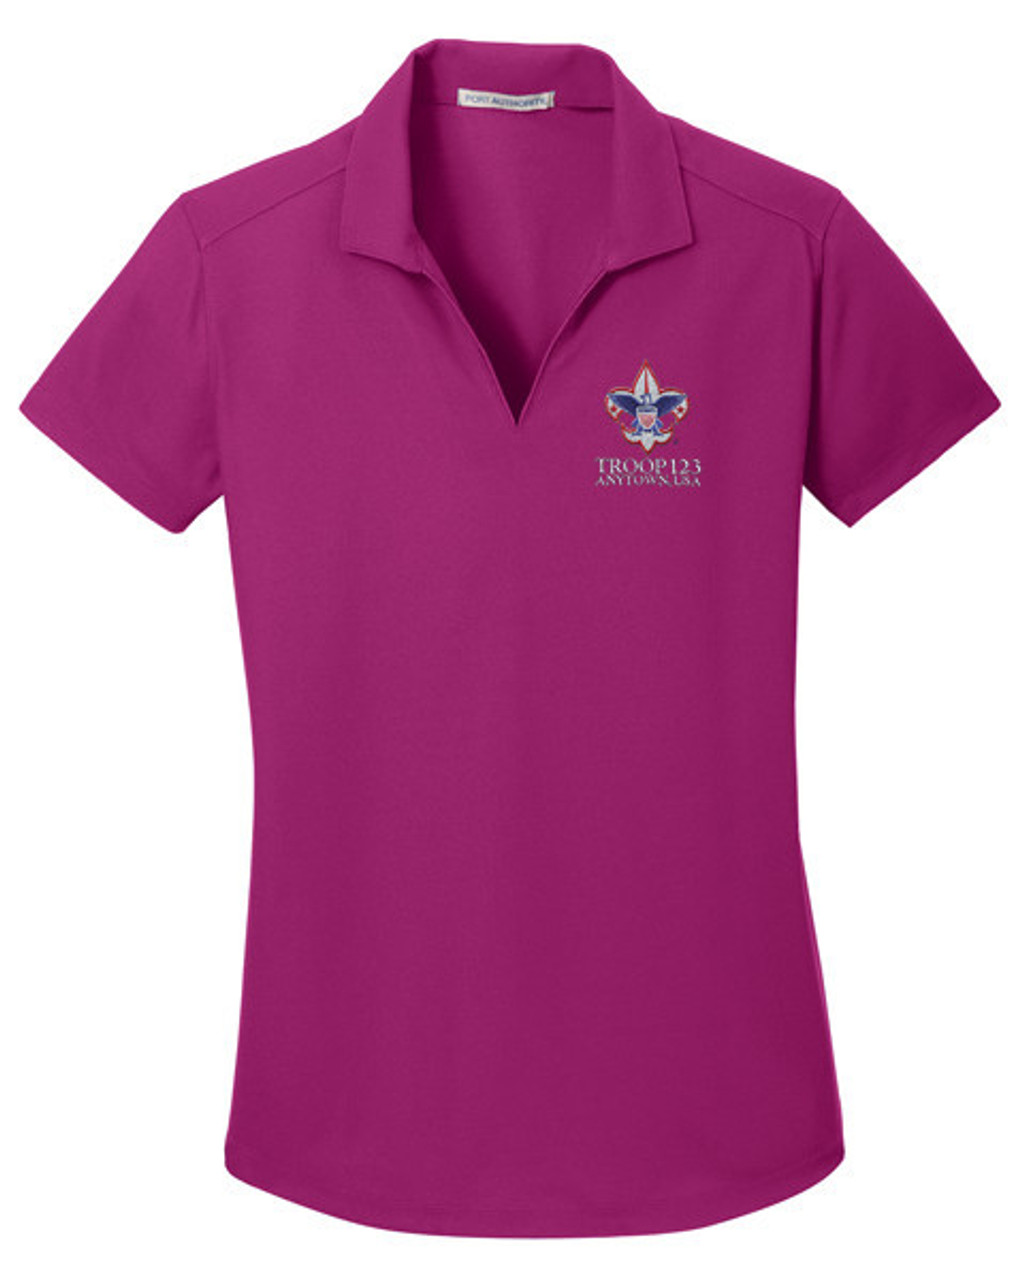 Grid Ladies Wicking Polo with Embroidered BSA Corporate Logo